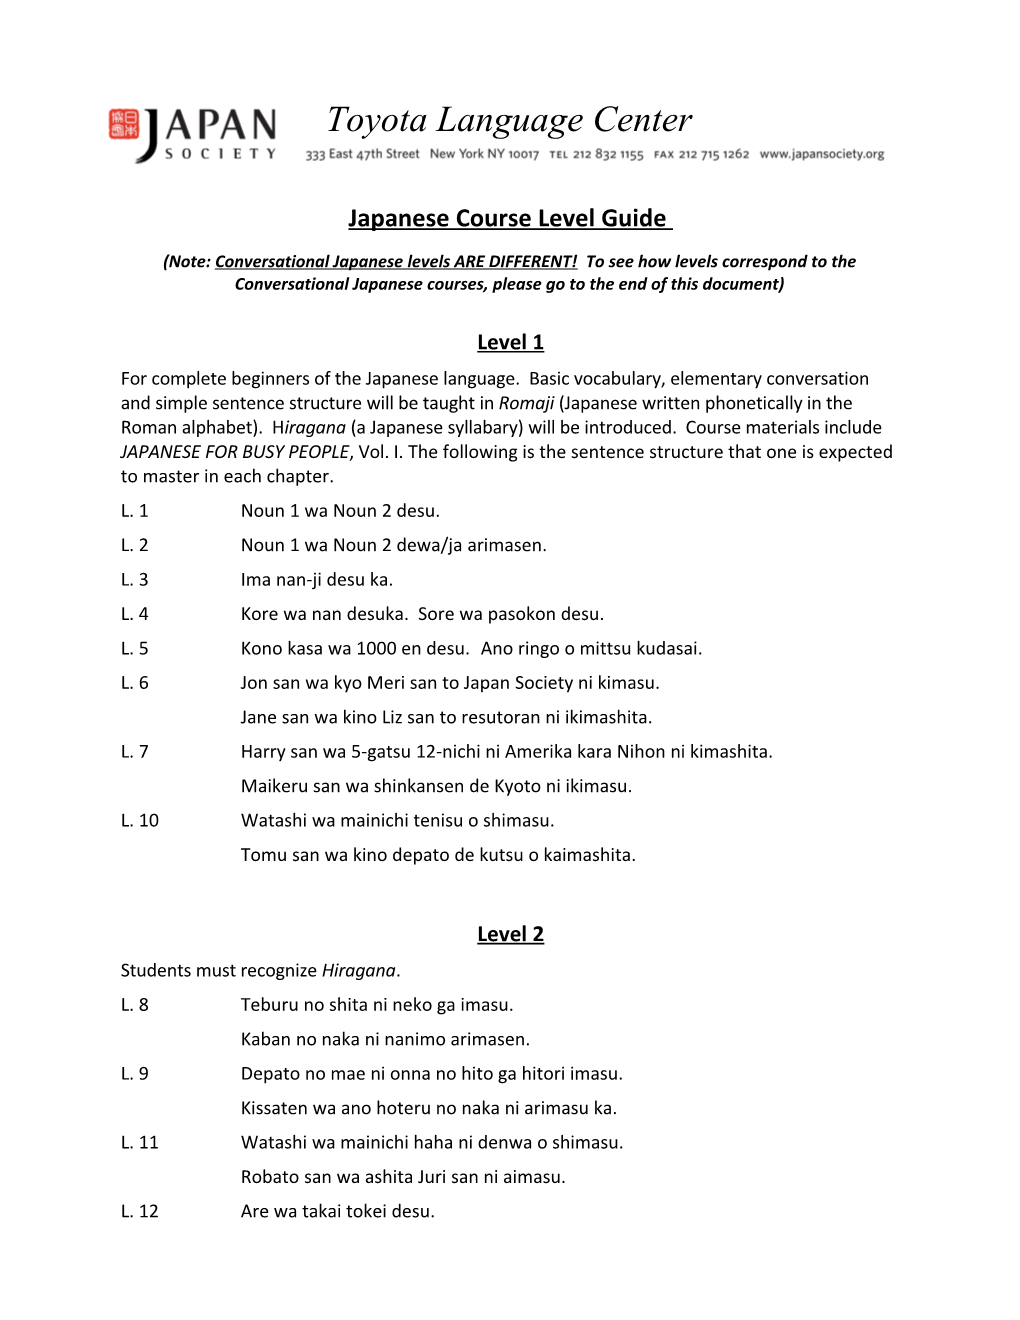 Japanese Course Level Guide